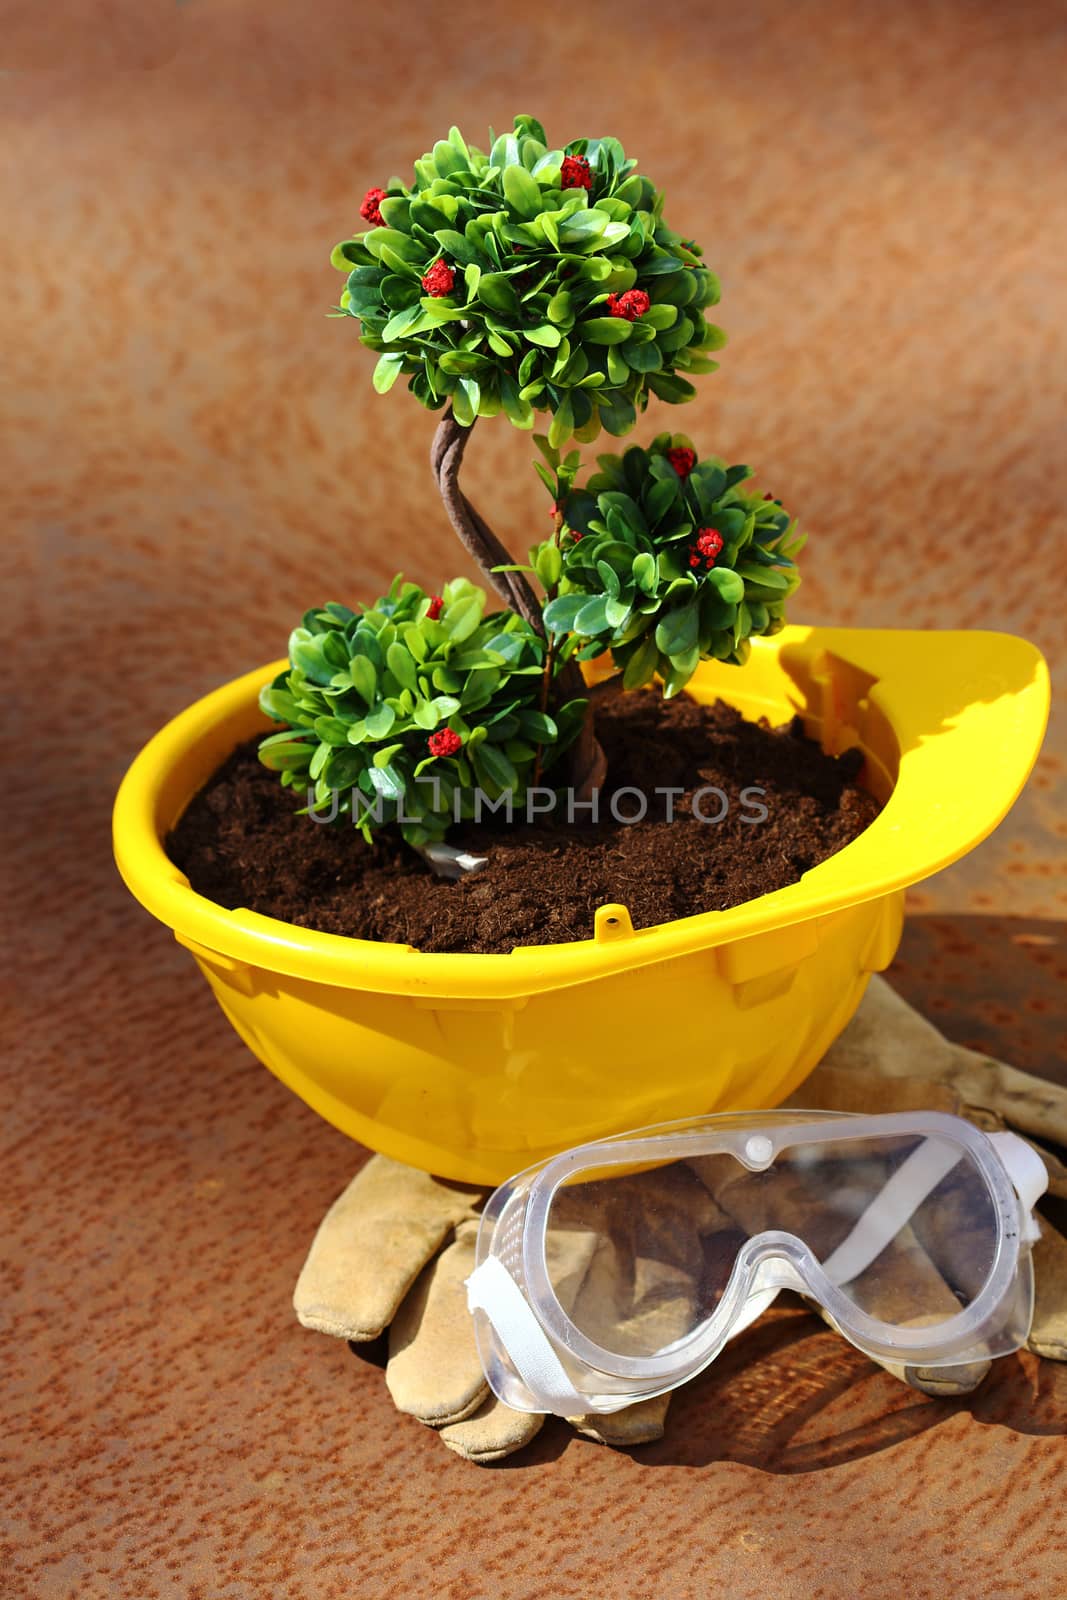 Green plant in yellow helmet on rusty background - environmental friendly industry concept